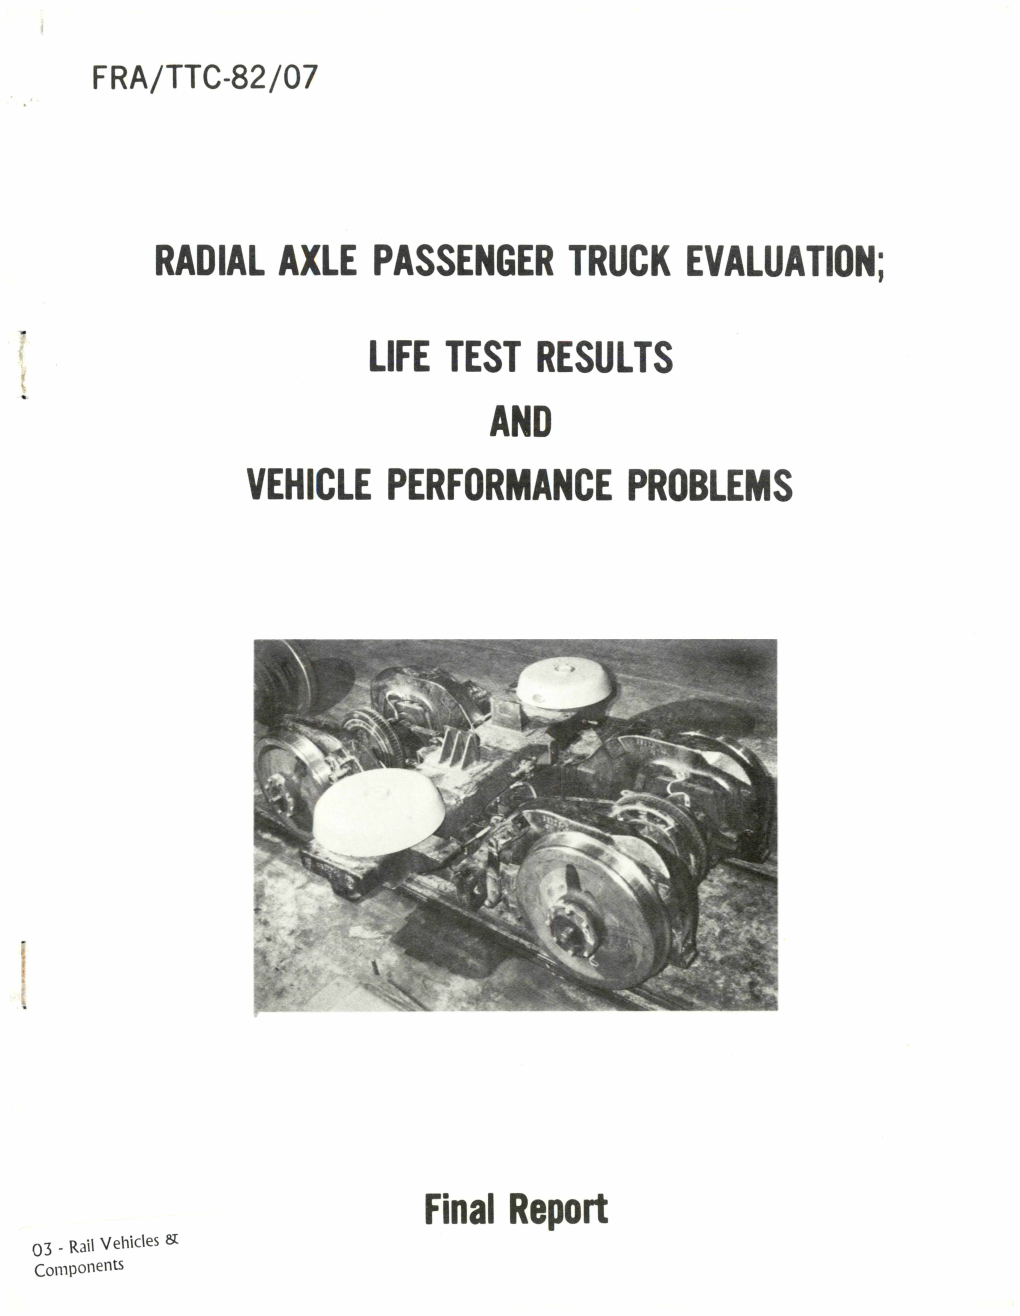 RADIAL AXLE PASSENGER TRUCK EVALUATION; LIFE TEST RESULTS and VEHICLE PERFORMANCE PROBLEMS Final Report